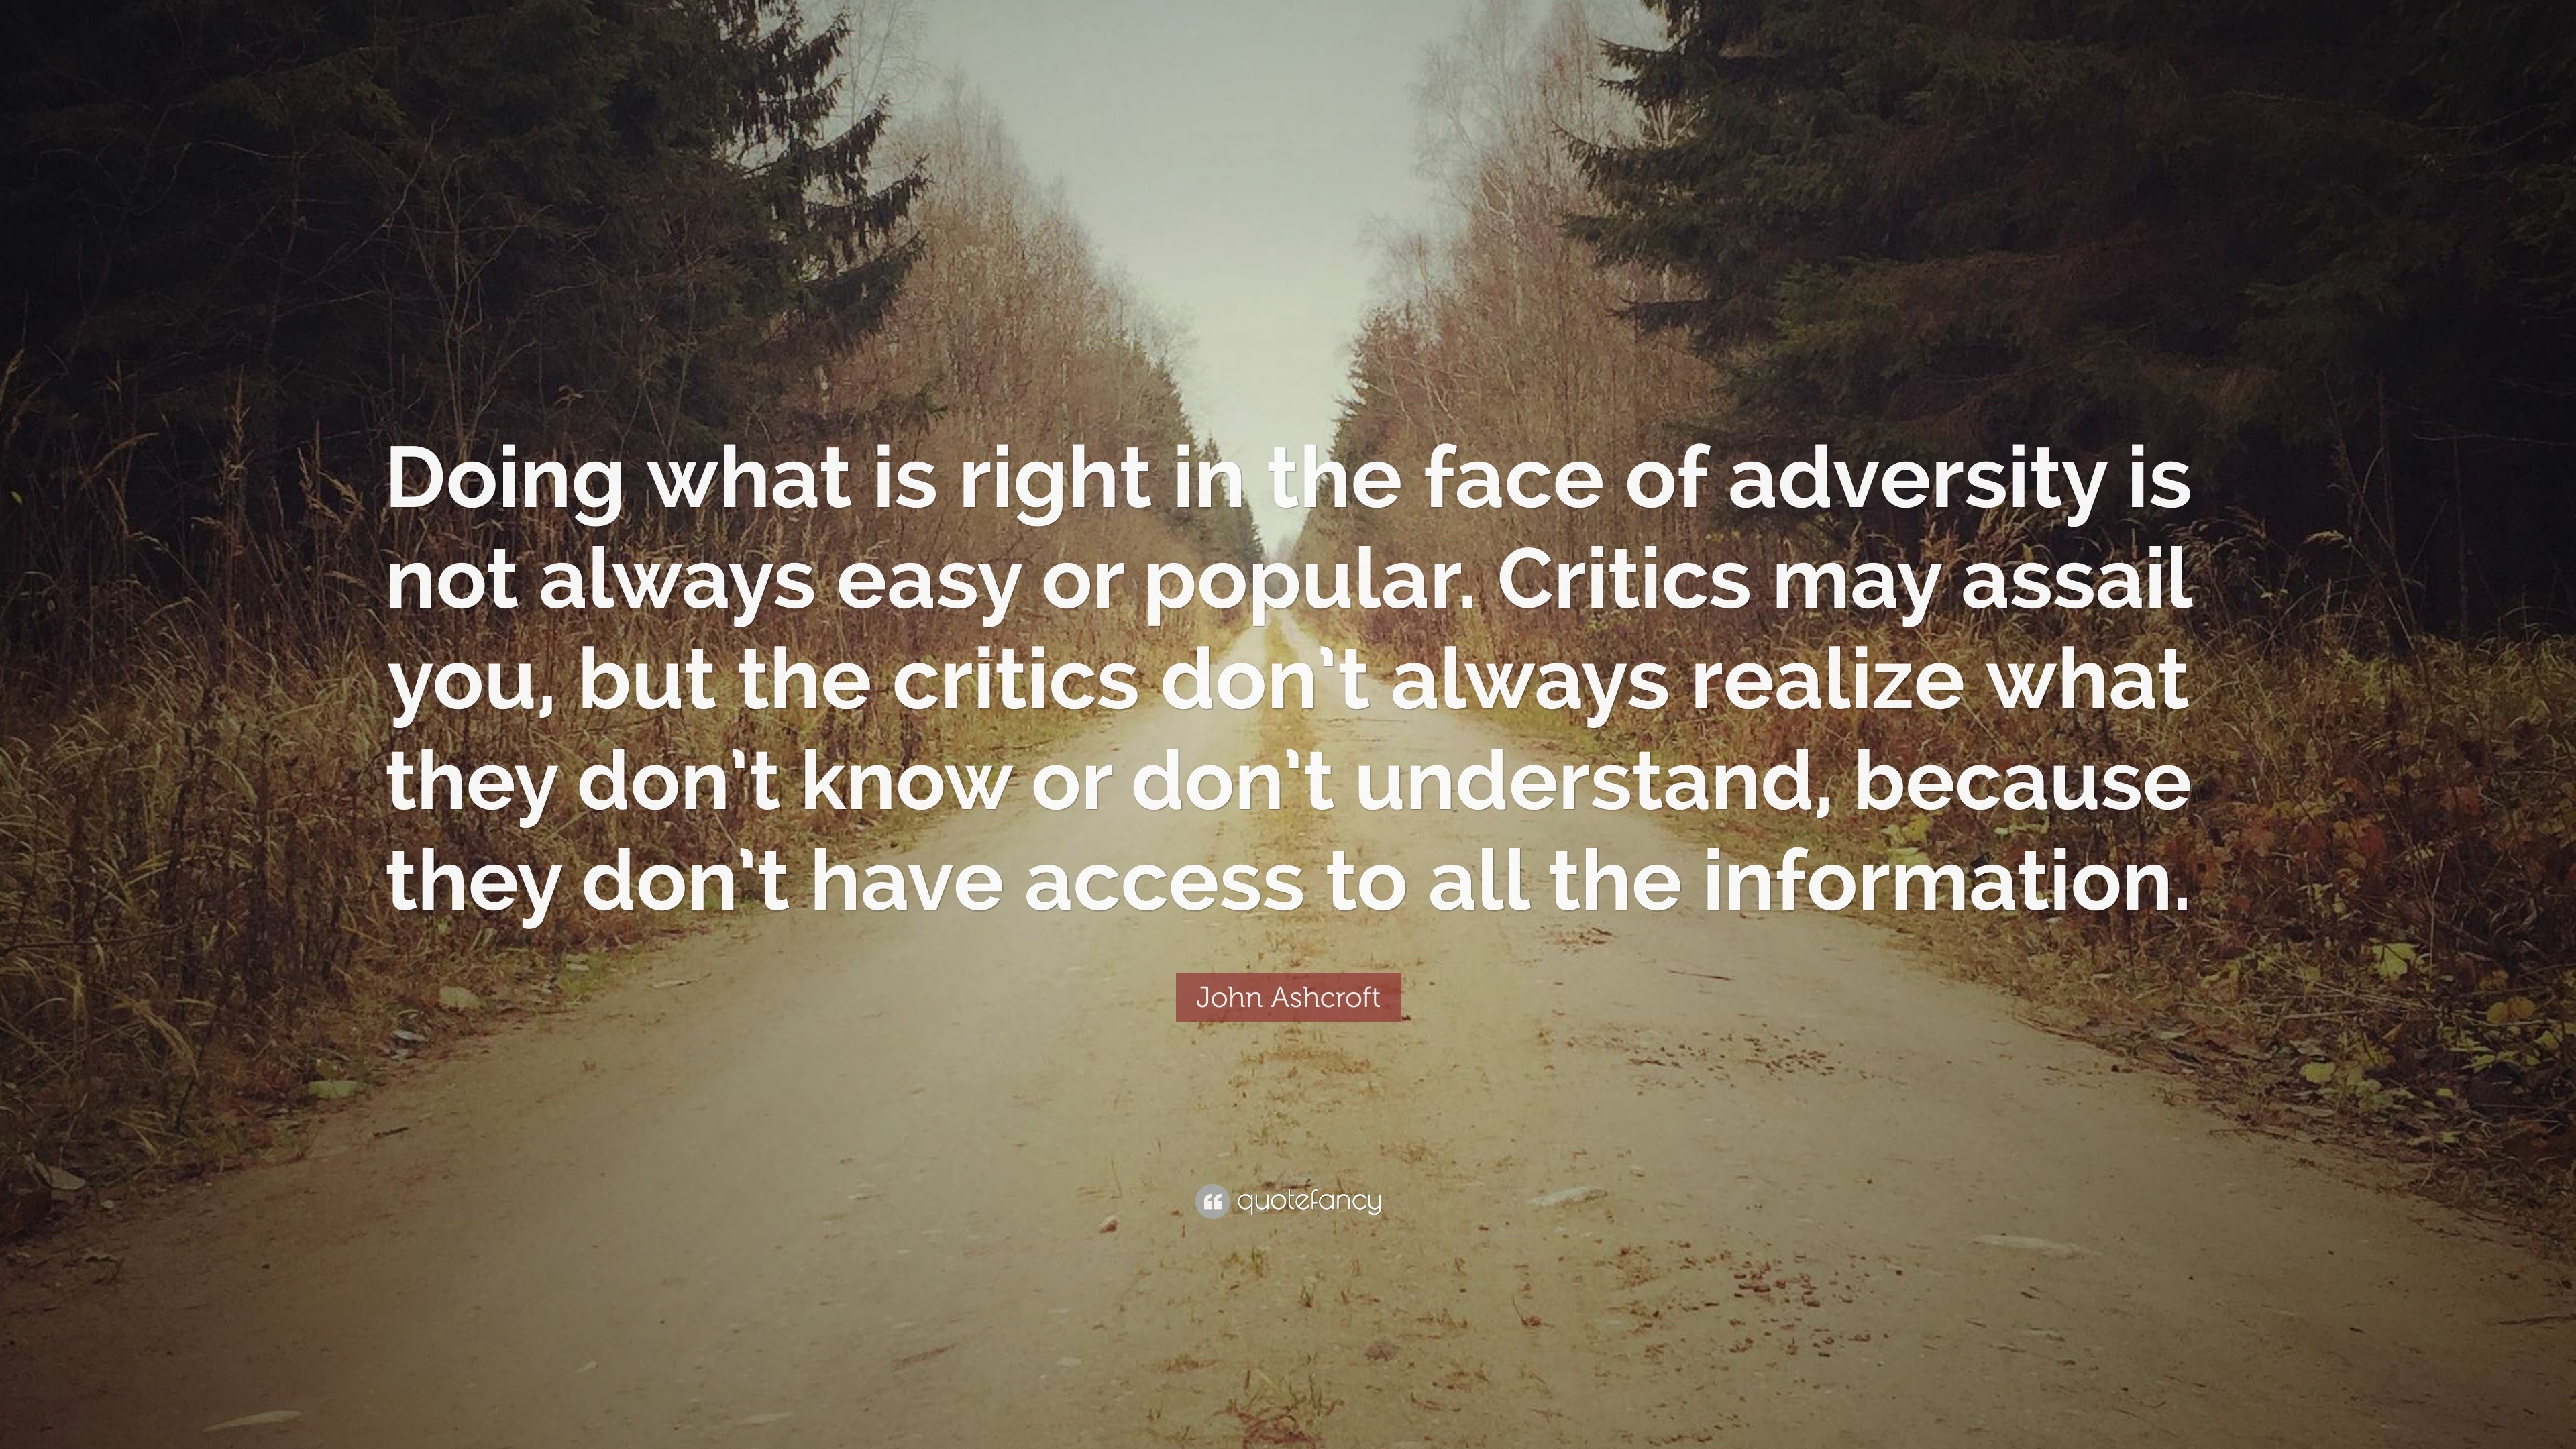 John Ashcroft Quote: “Doing what is right in the face of adversity is ...